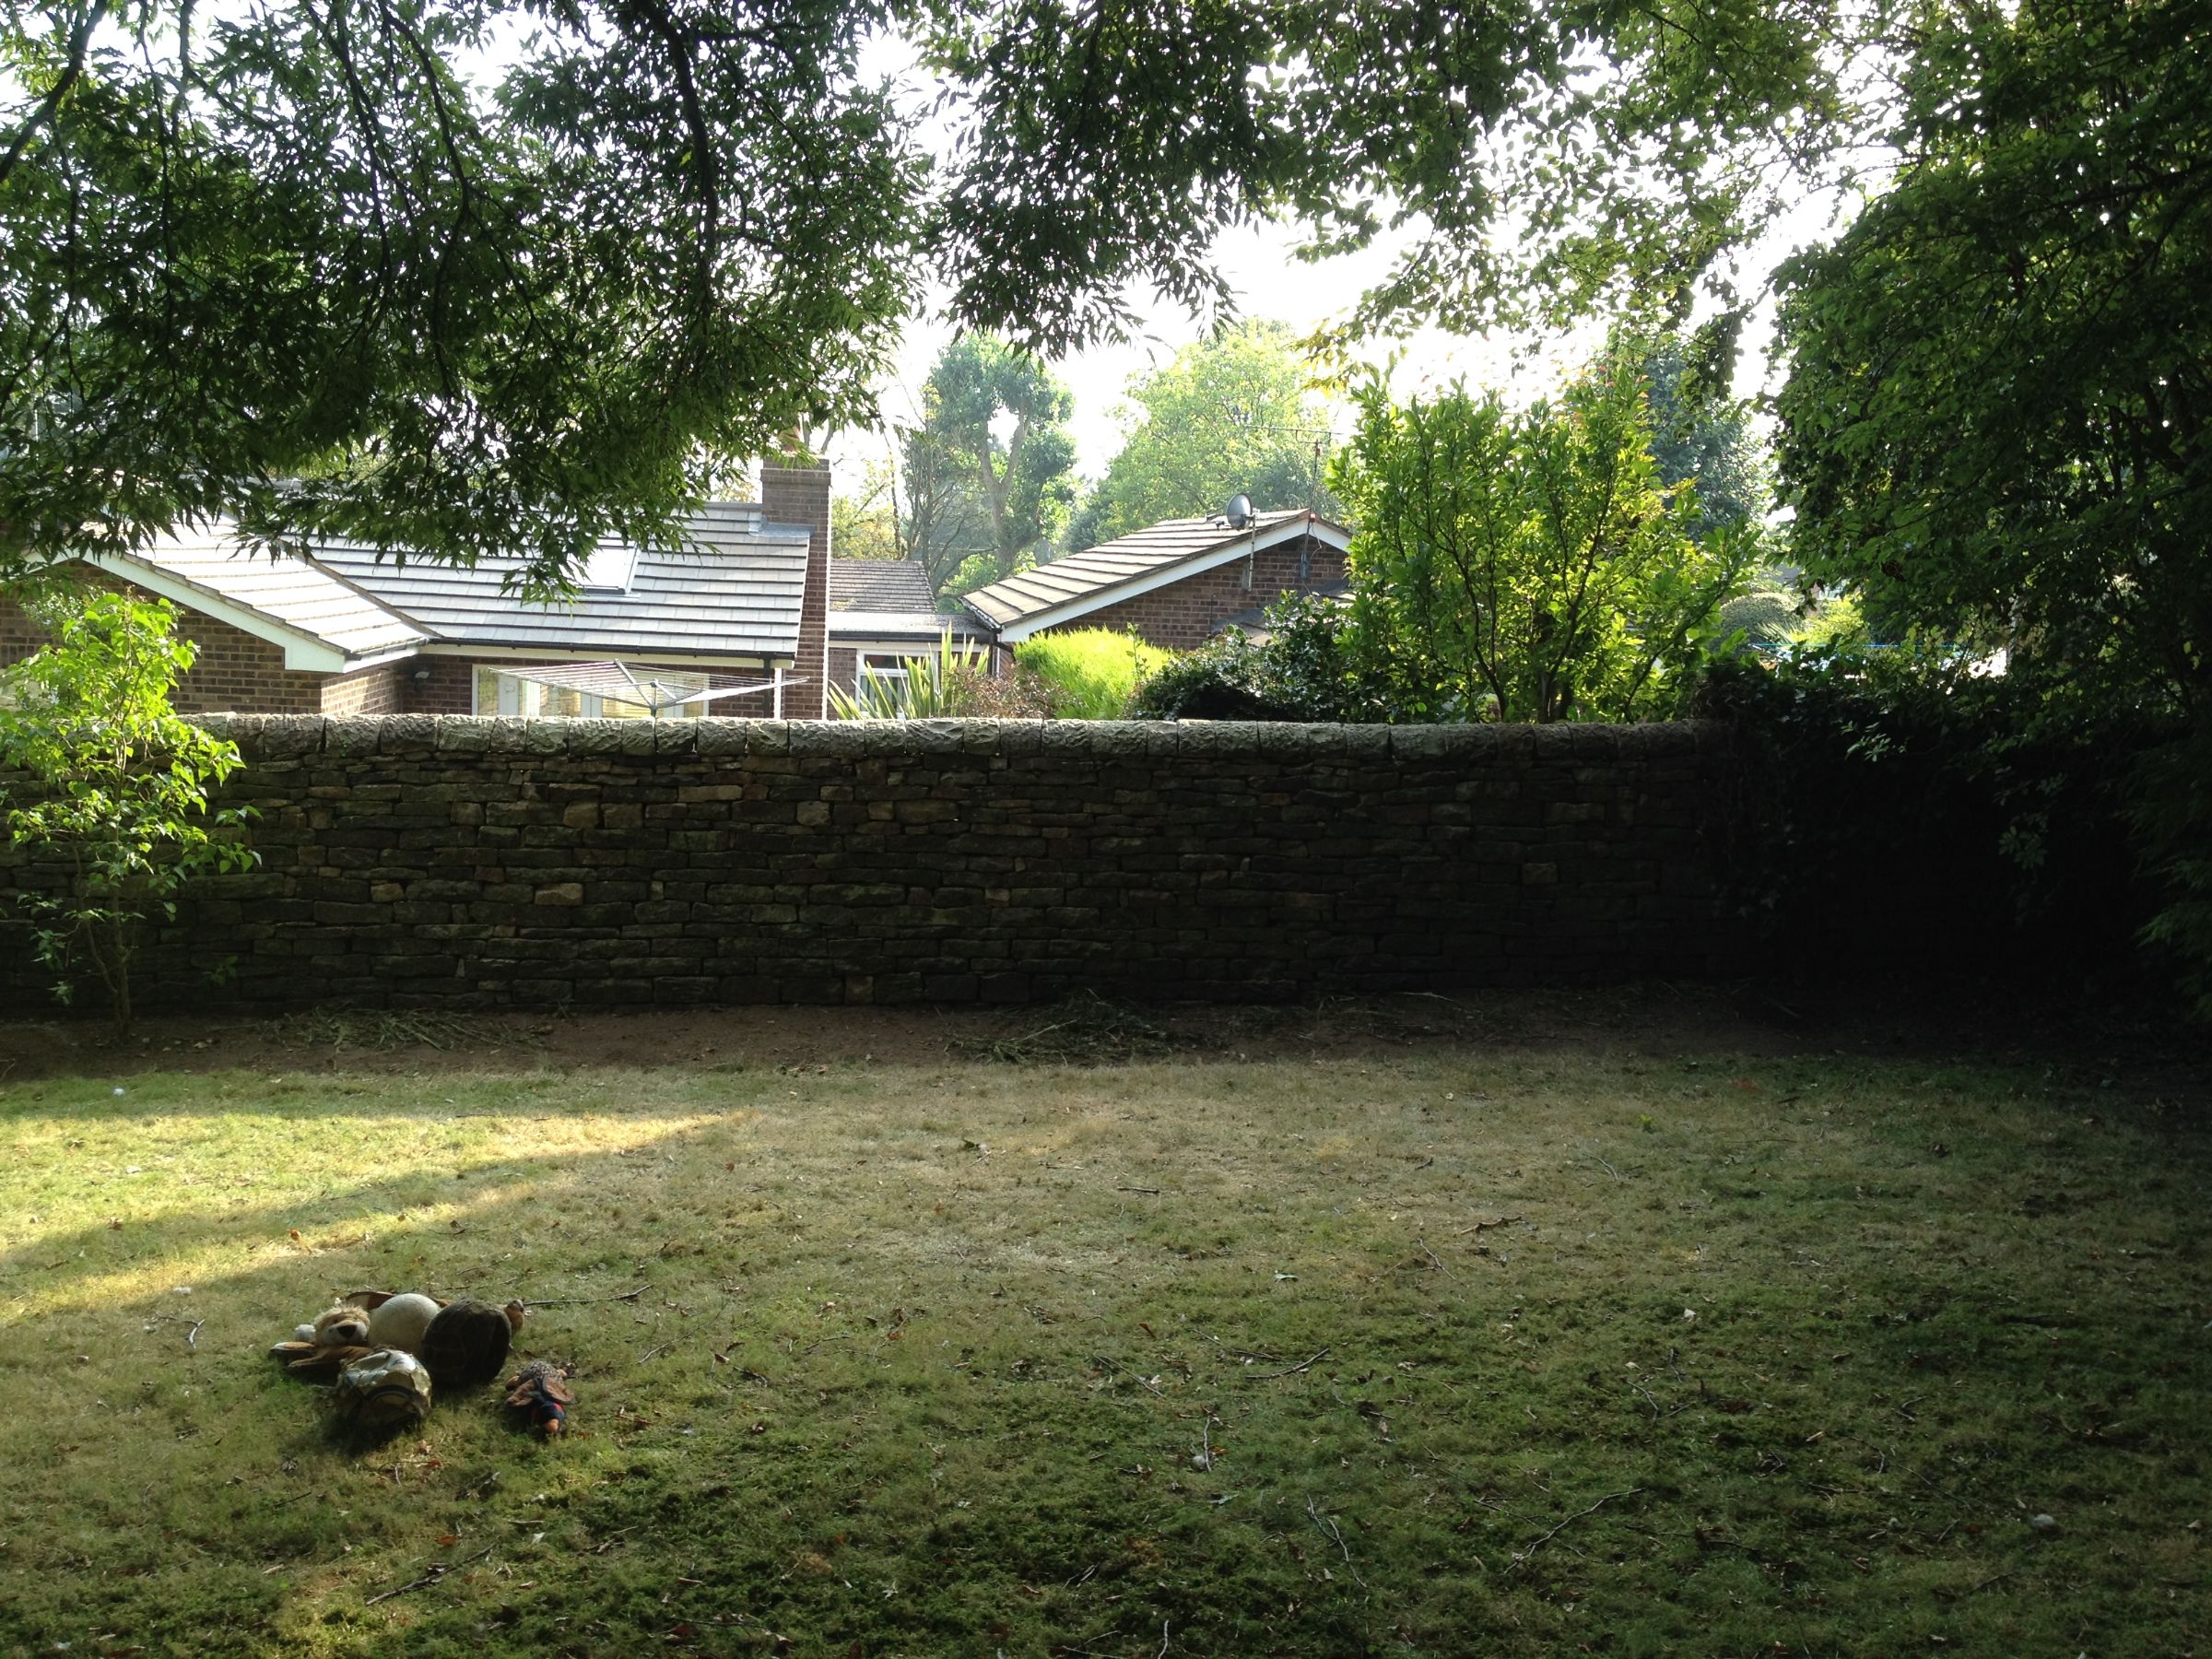 Dry Stone Wall repair on a Grade II listed garden wall